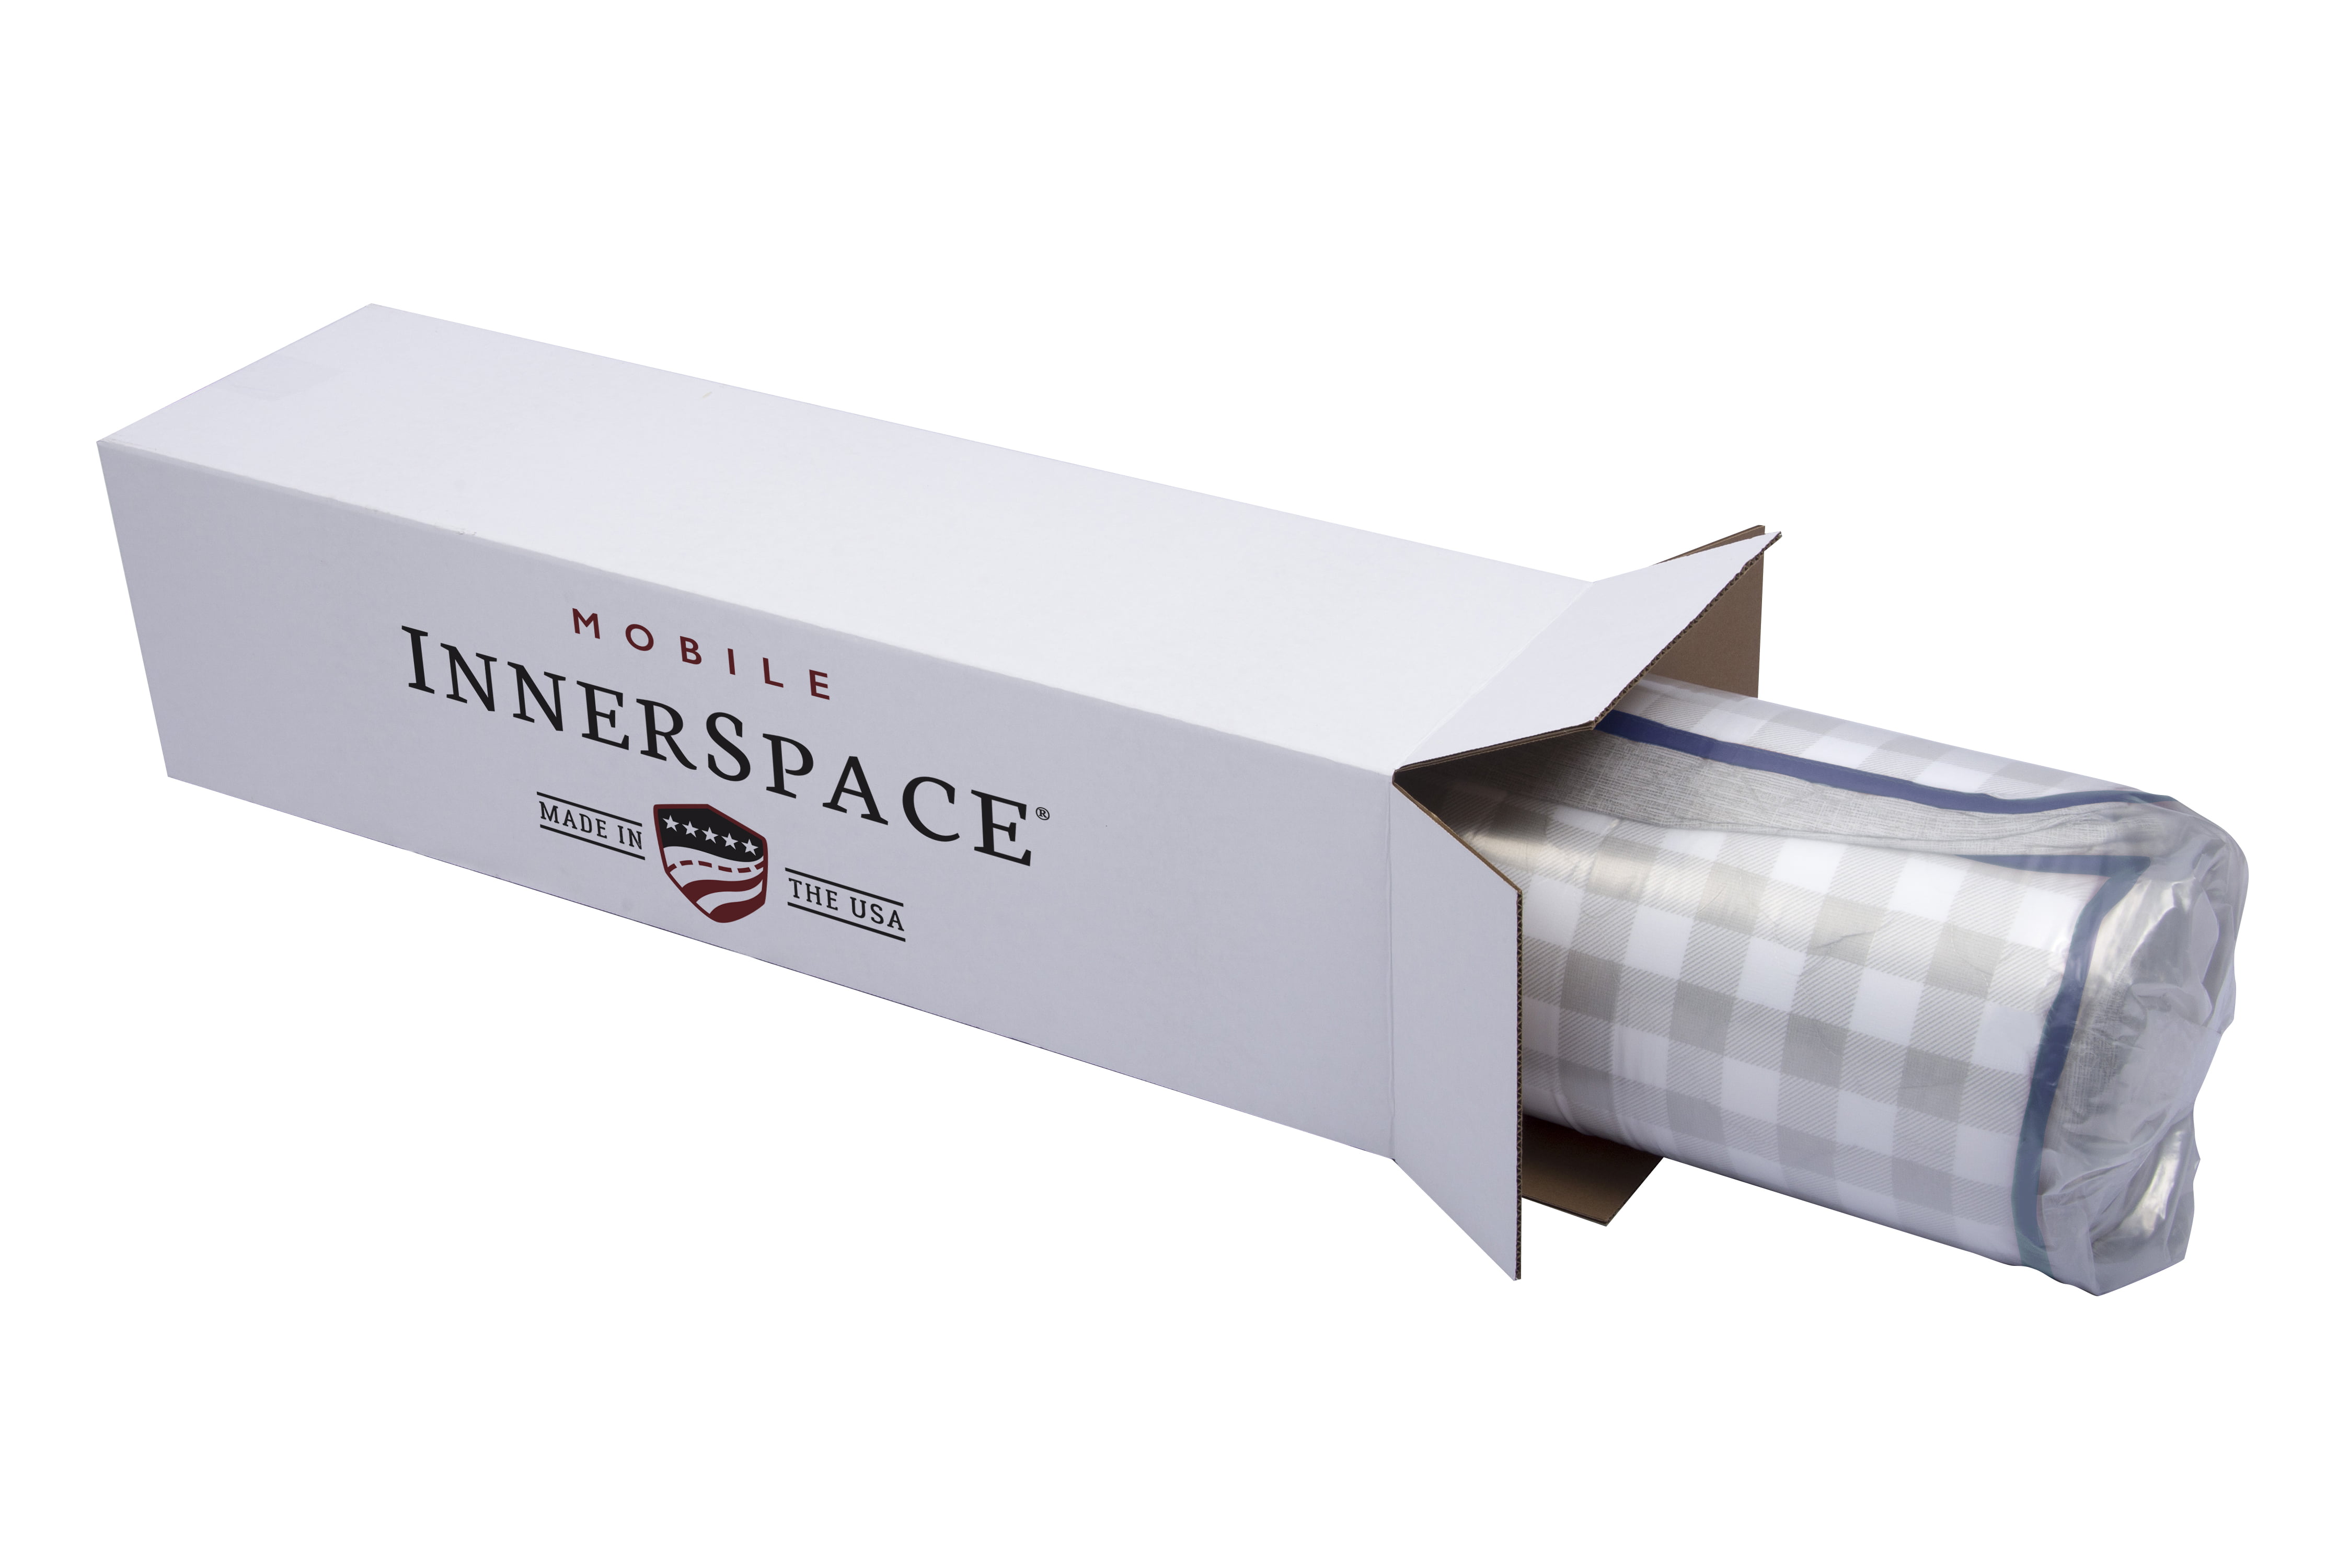 28 by 79 by 5.5-Inch Mobile InnerSpace Truck Relax Mattress 